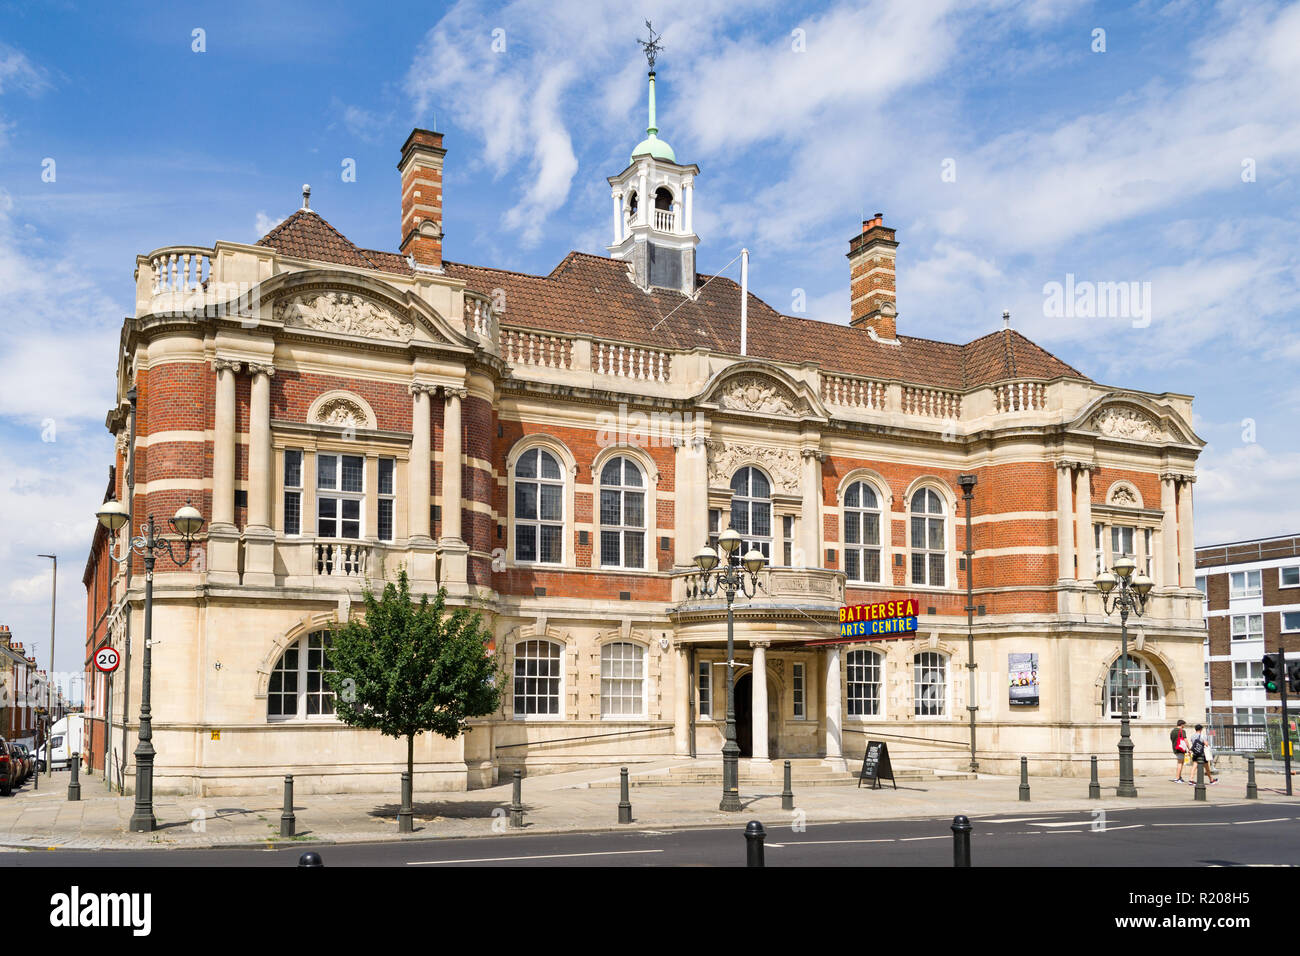 Exterior of Battersea Arts Centre, a Grade II* listed building, showing main entrance by road, London, UK Stock Photo